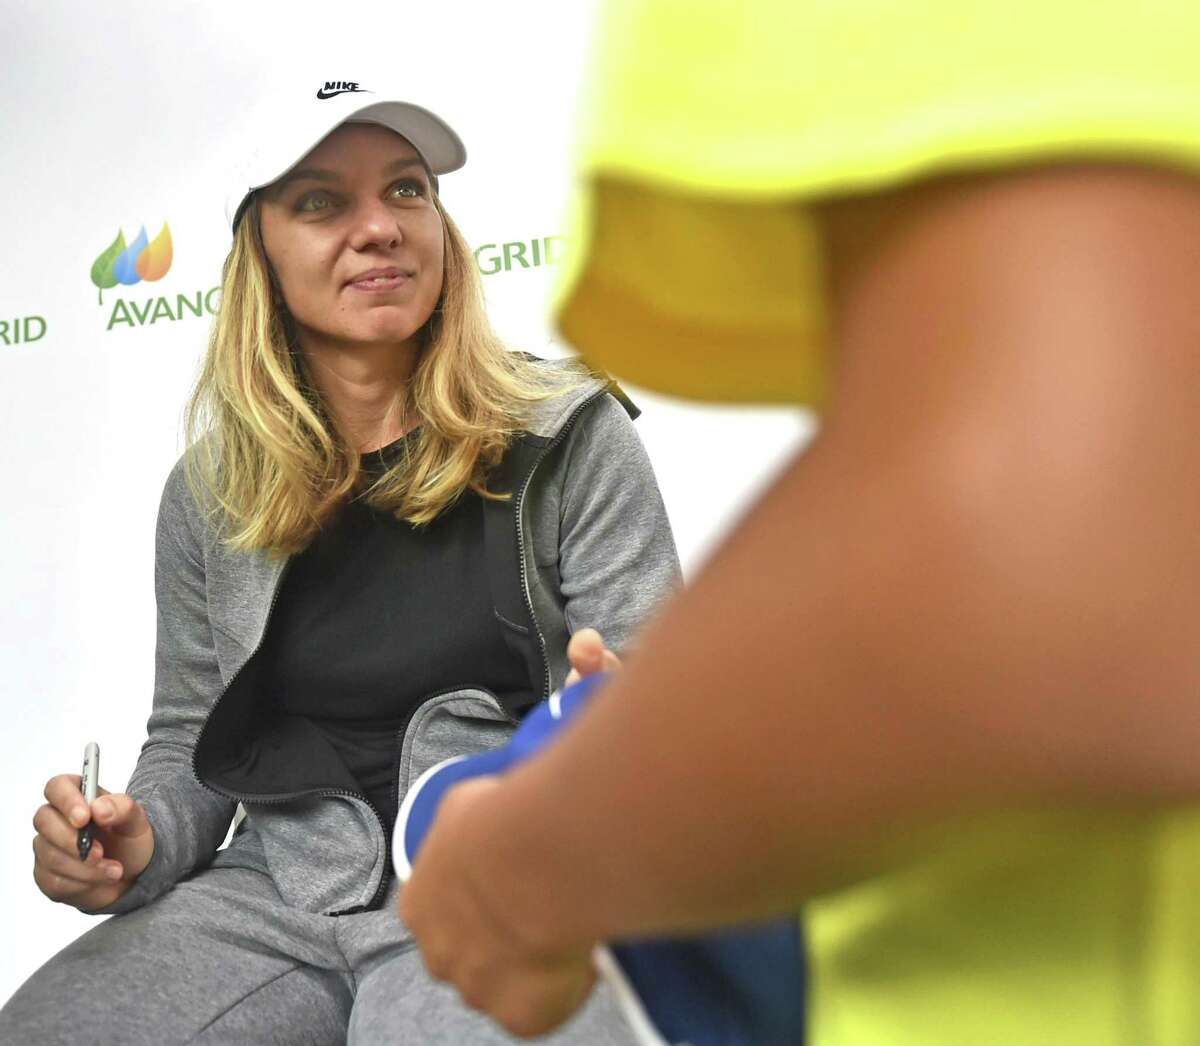 WTA tennis player Simona Halep, the No. 1 ranked player in the world, signs autographs Monday at the Connecticut Open at the Connecticut Tennis Center in New Haven.